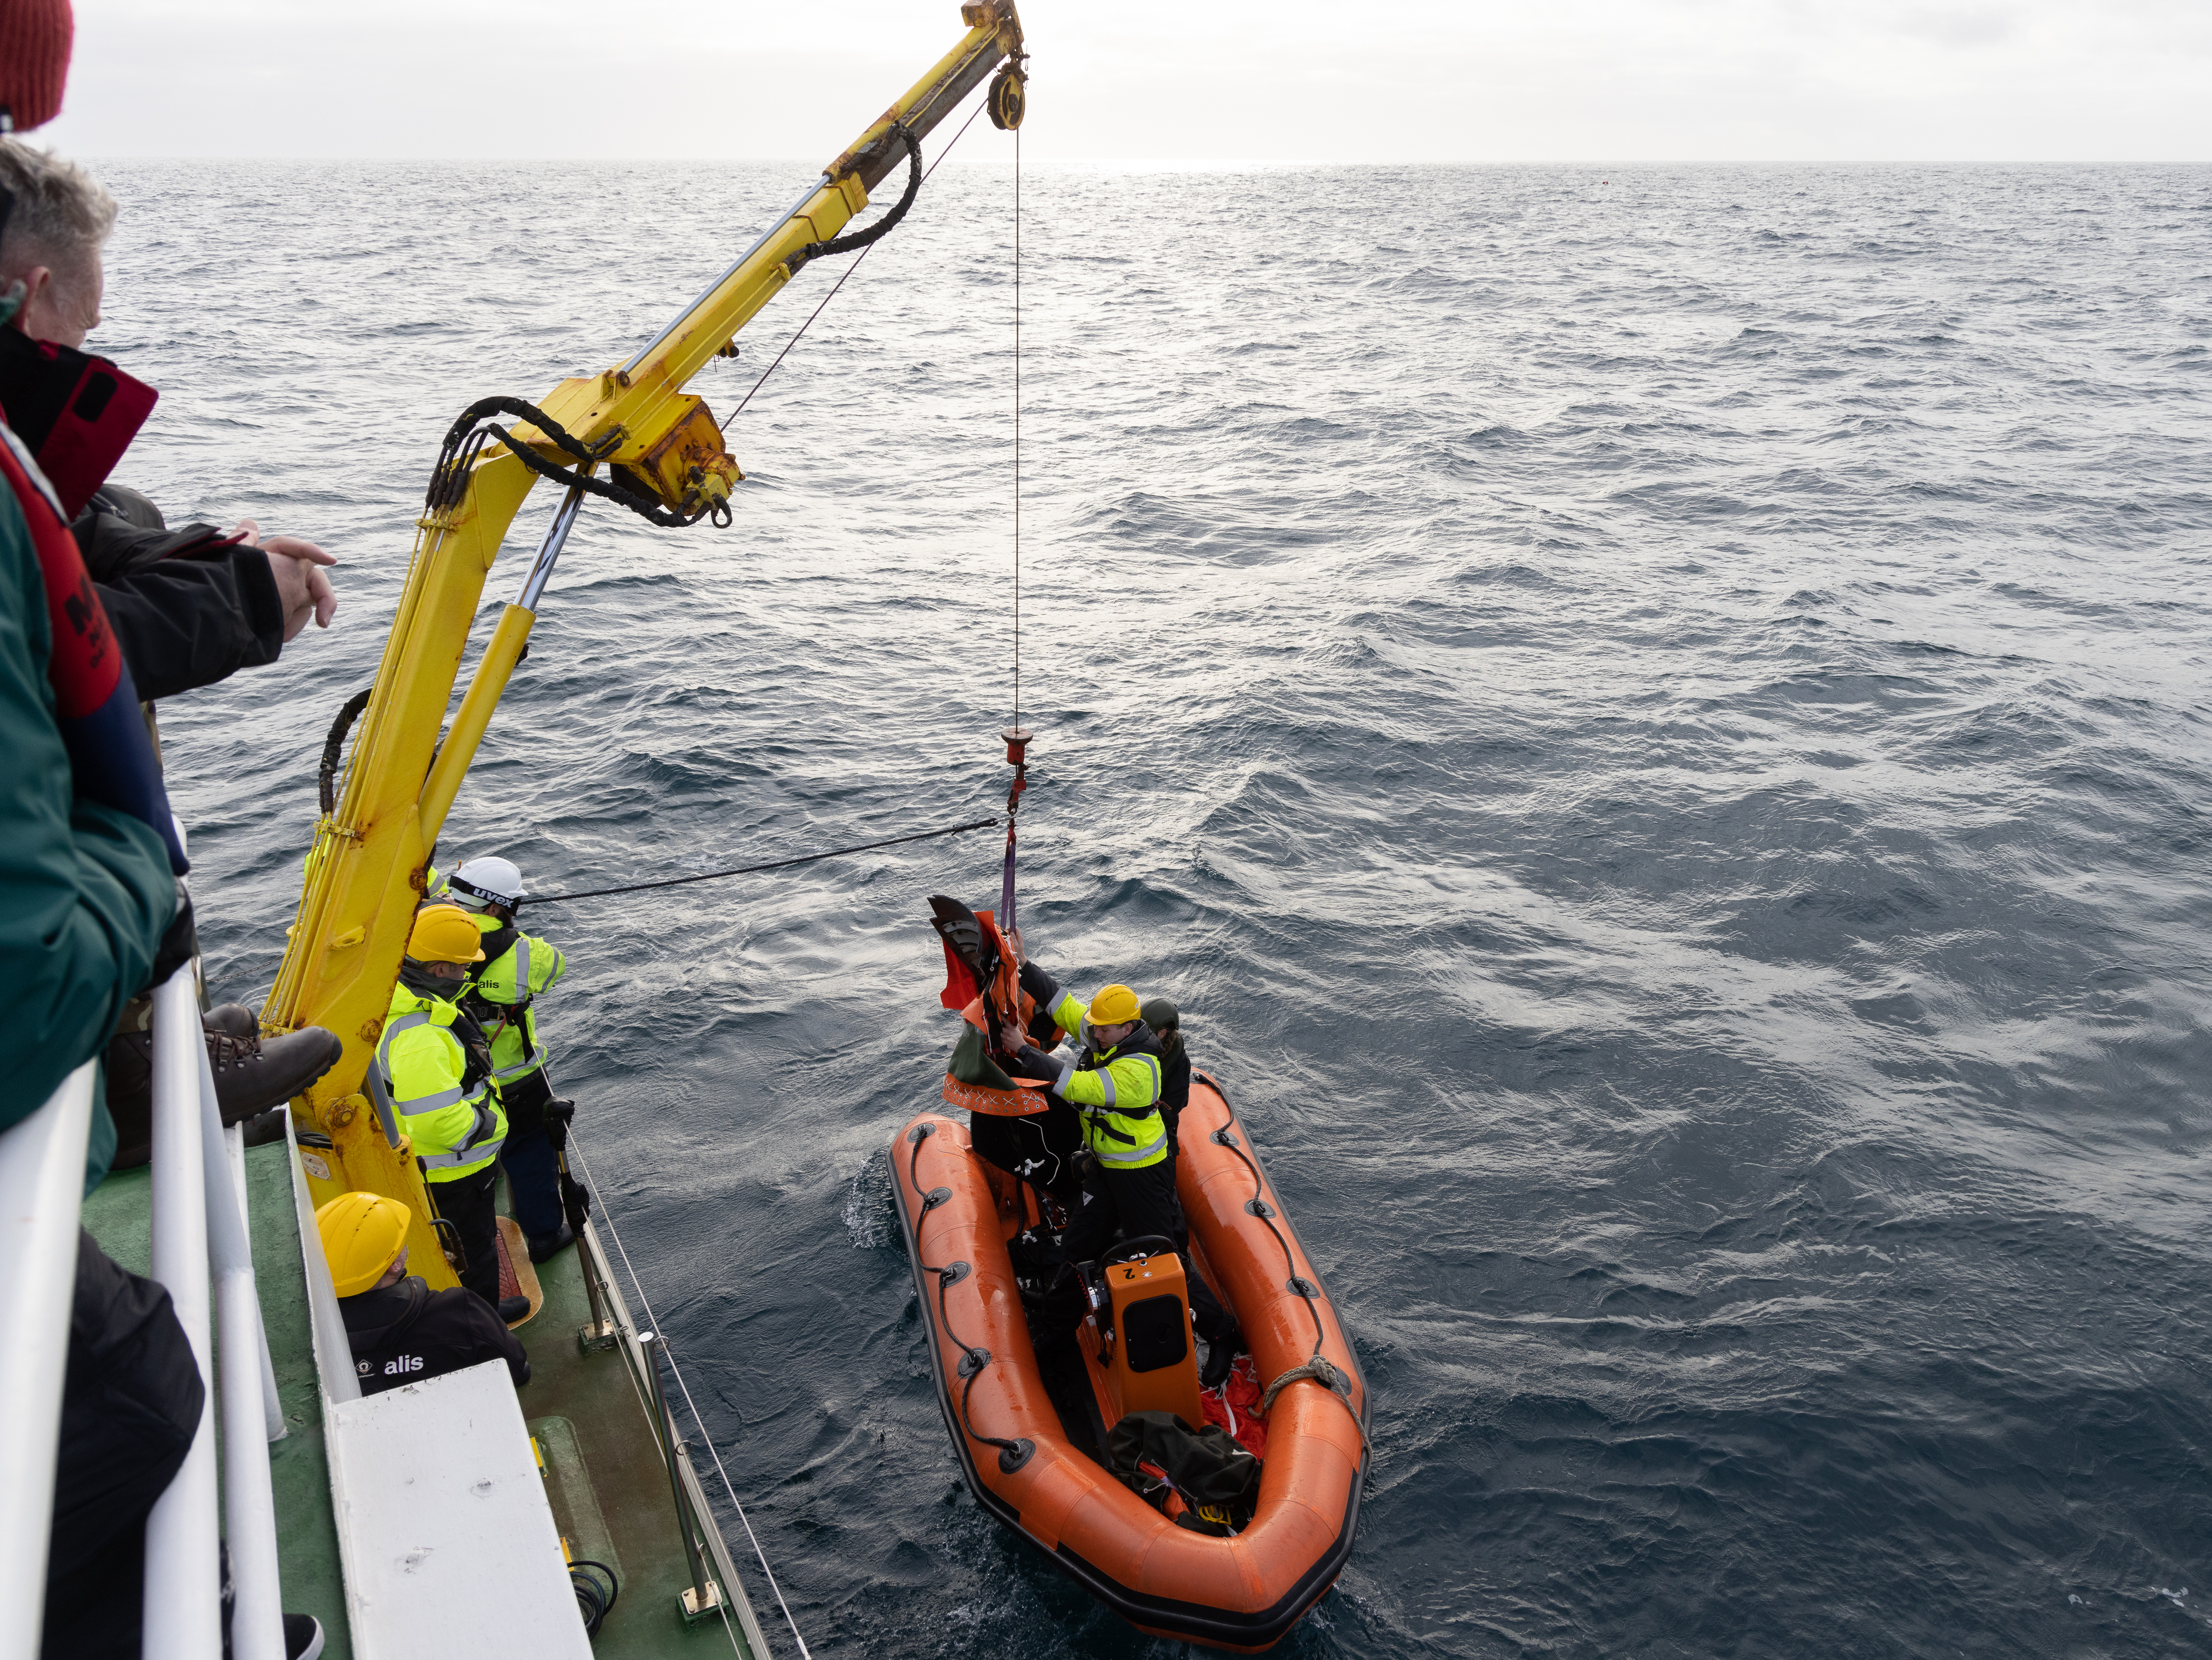 Image shows RAF Search and Rescue team lifting a lifeboat out of the sea.